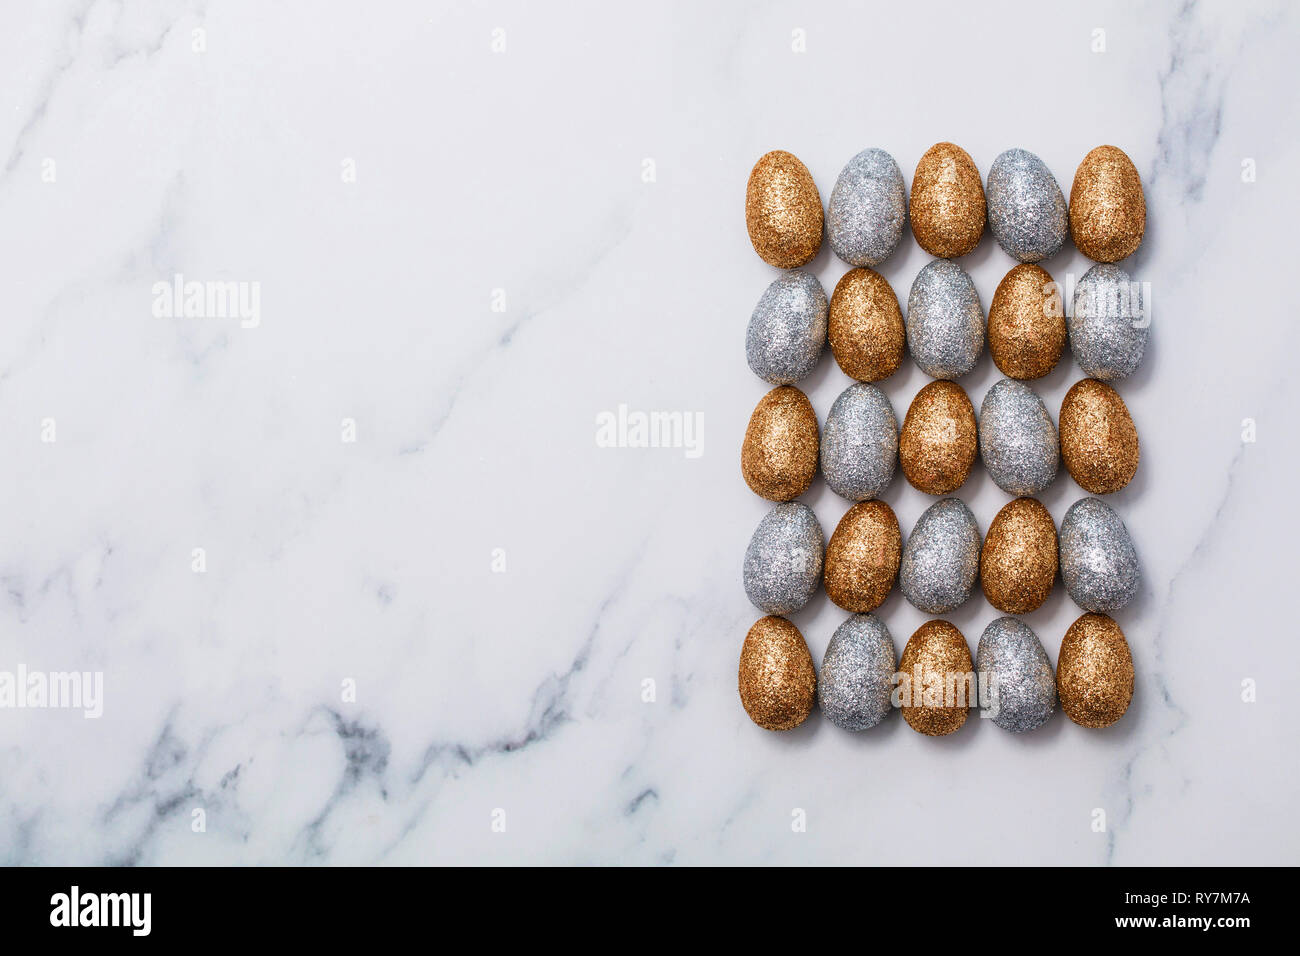 Gold and silver glitter easter eggs on a marble background Stock Photo